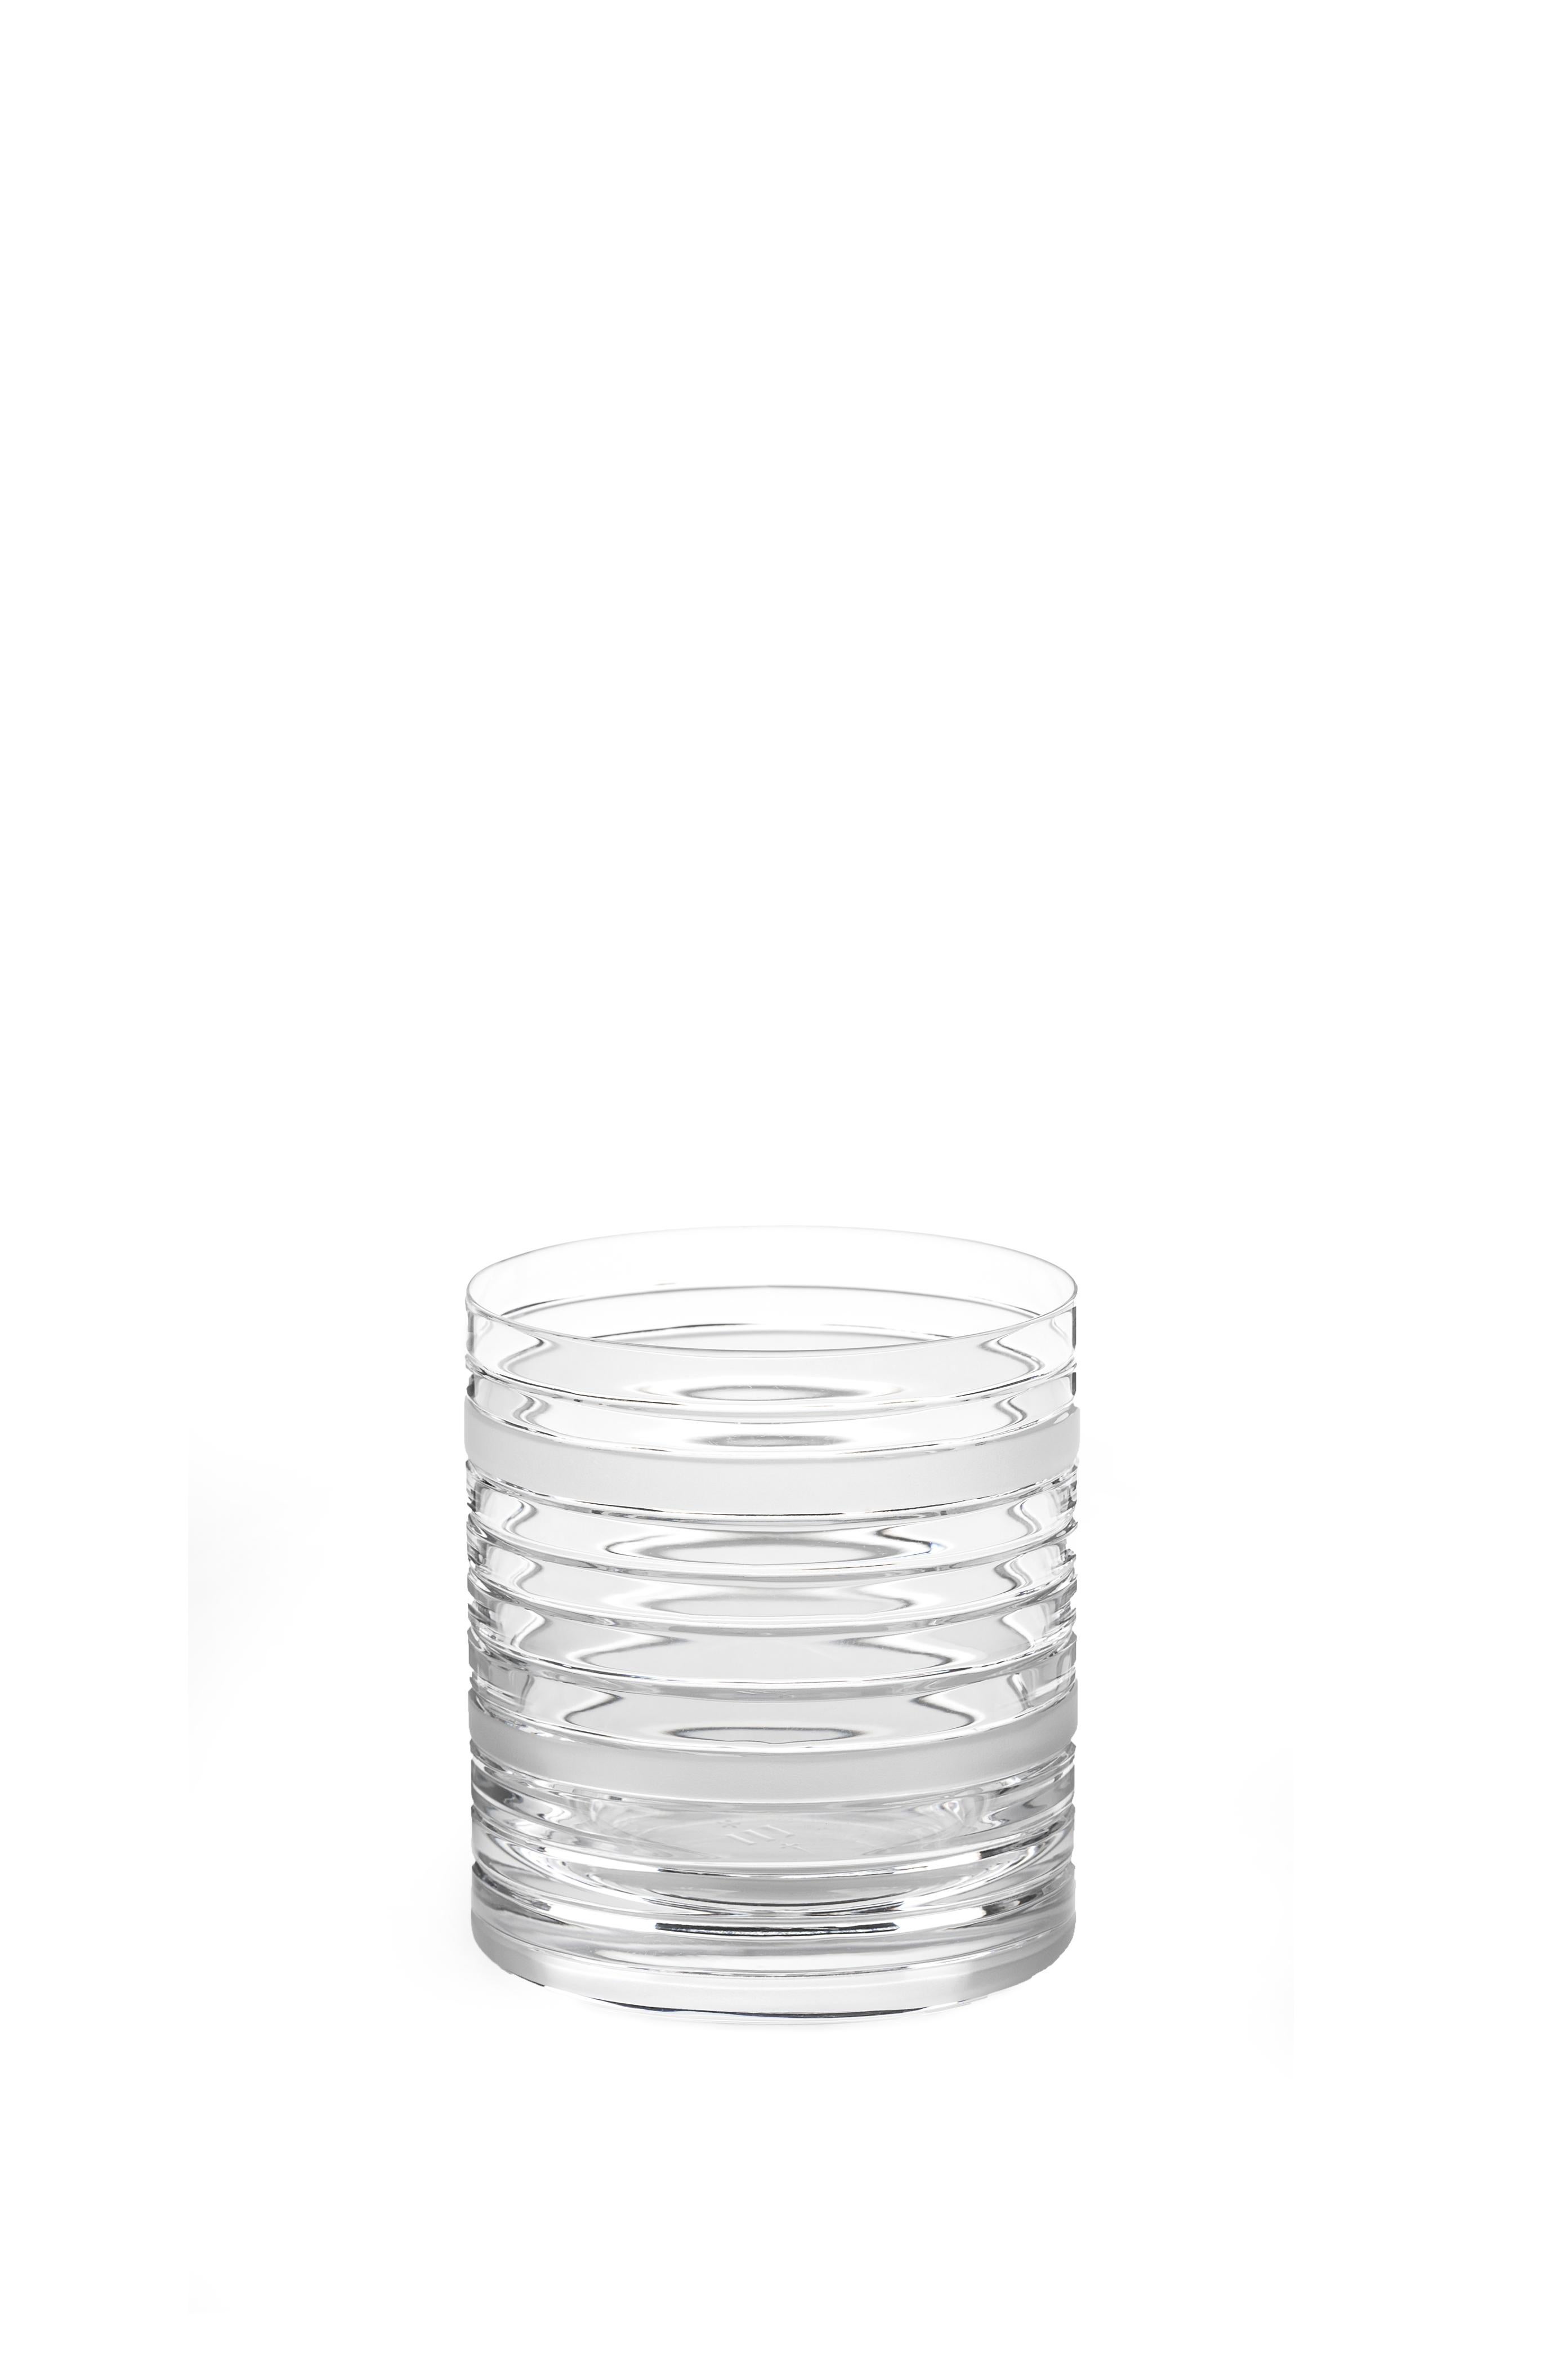 Scholten & Baijings Handmade Irish Crystal Whiskey Glass Elements CUT NO. II In New Condition For Sale In Ballyduff, IE